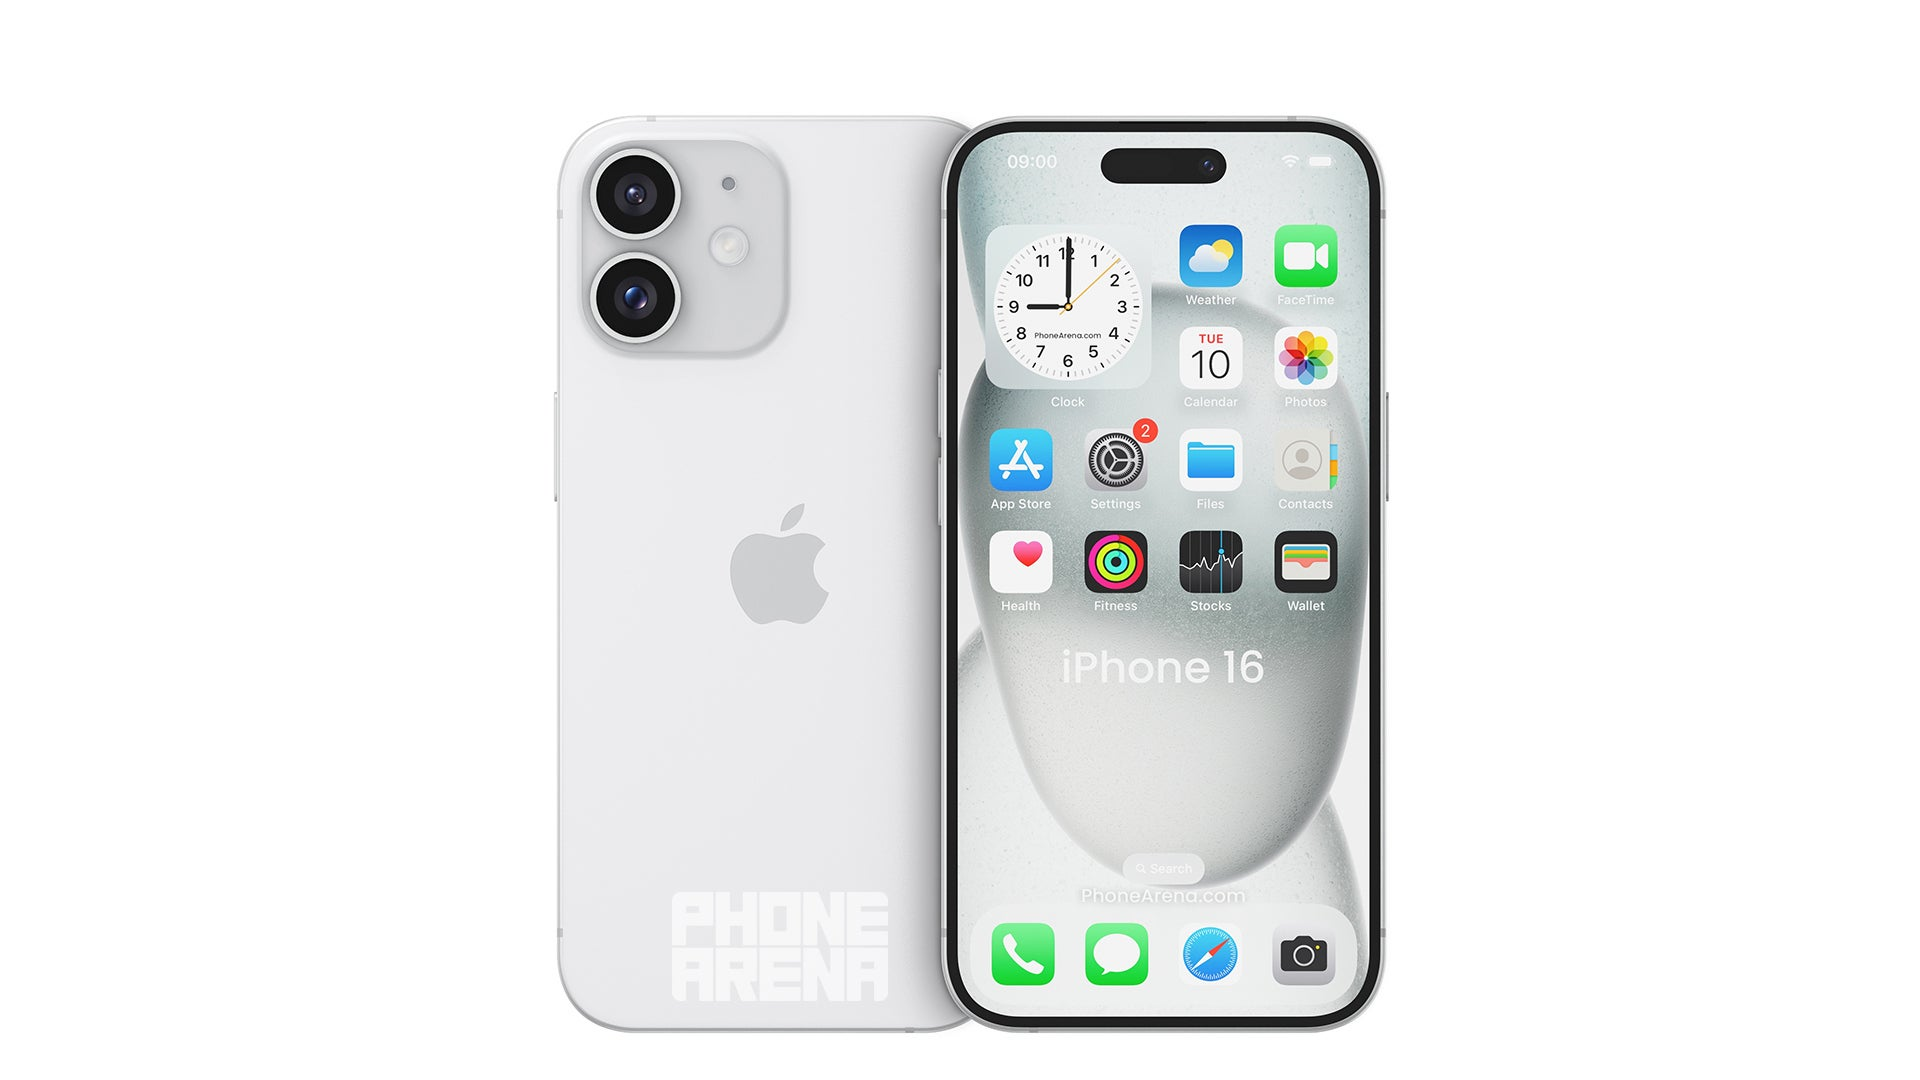 The standard iPhone 16 pair will have a vertical rear camera.